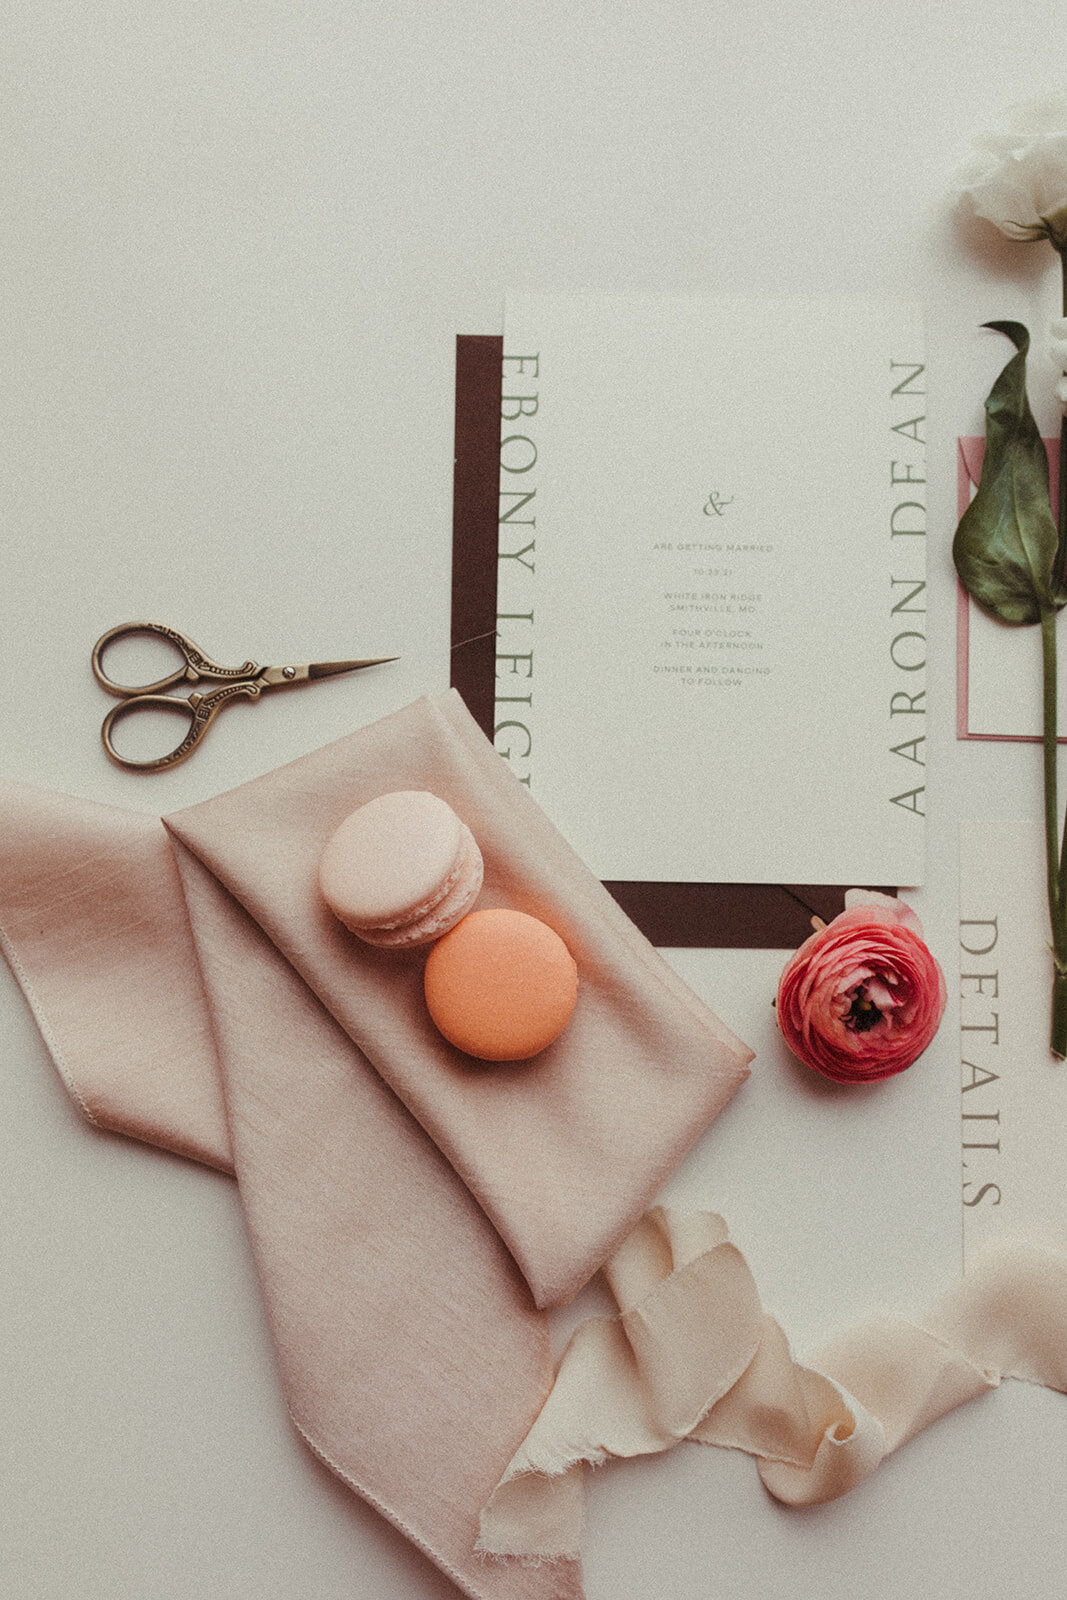 White wedding stationery with gray font set with a blush napkin, peach-colored macaroons, a flower and scissors.